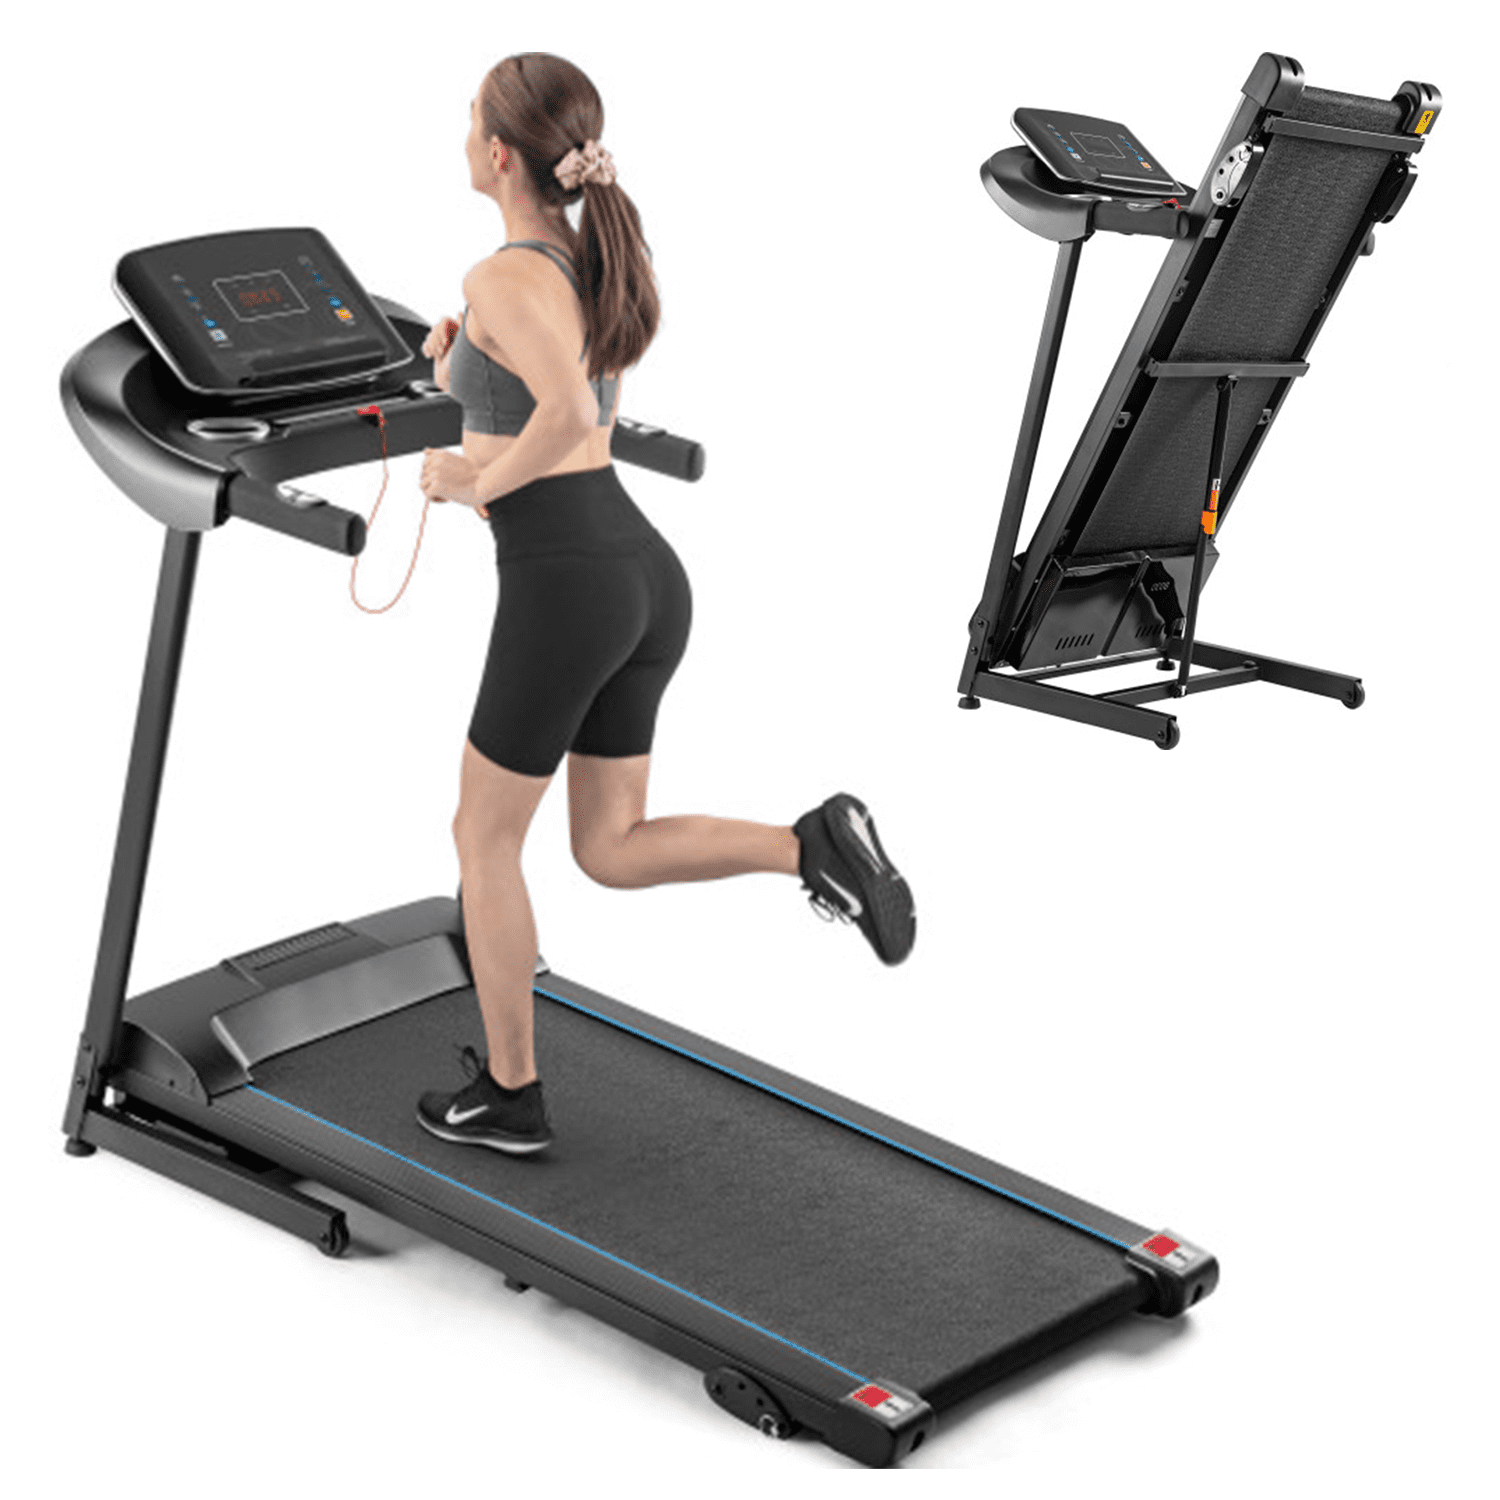 Electric Treadmill Hydraulic Folding Motorized Running Machine/Office Use 12 Pre-Programs Smarttech Electric Treadmill for Home Incline 3-level adjustable manuel USB & MP3-12.5KM/H 